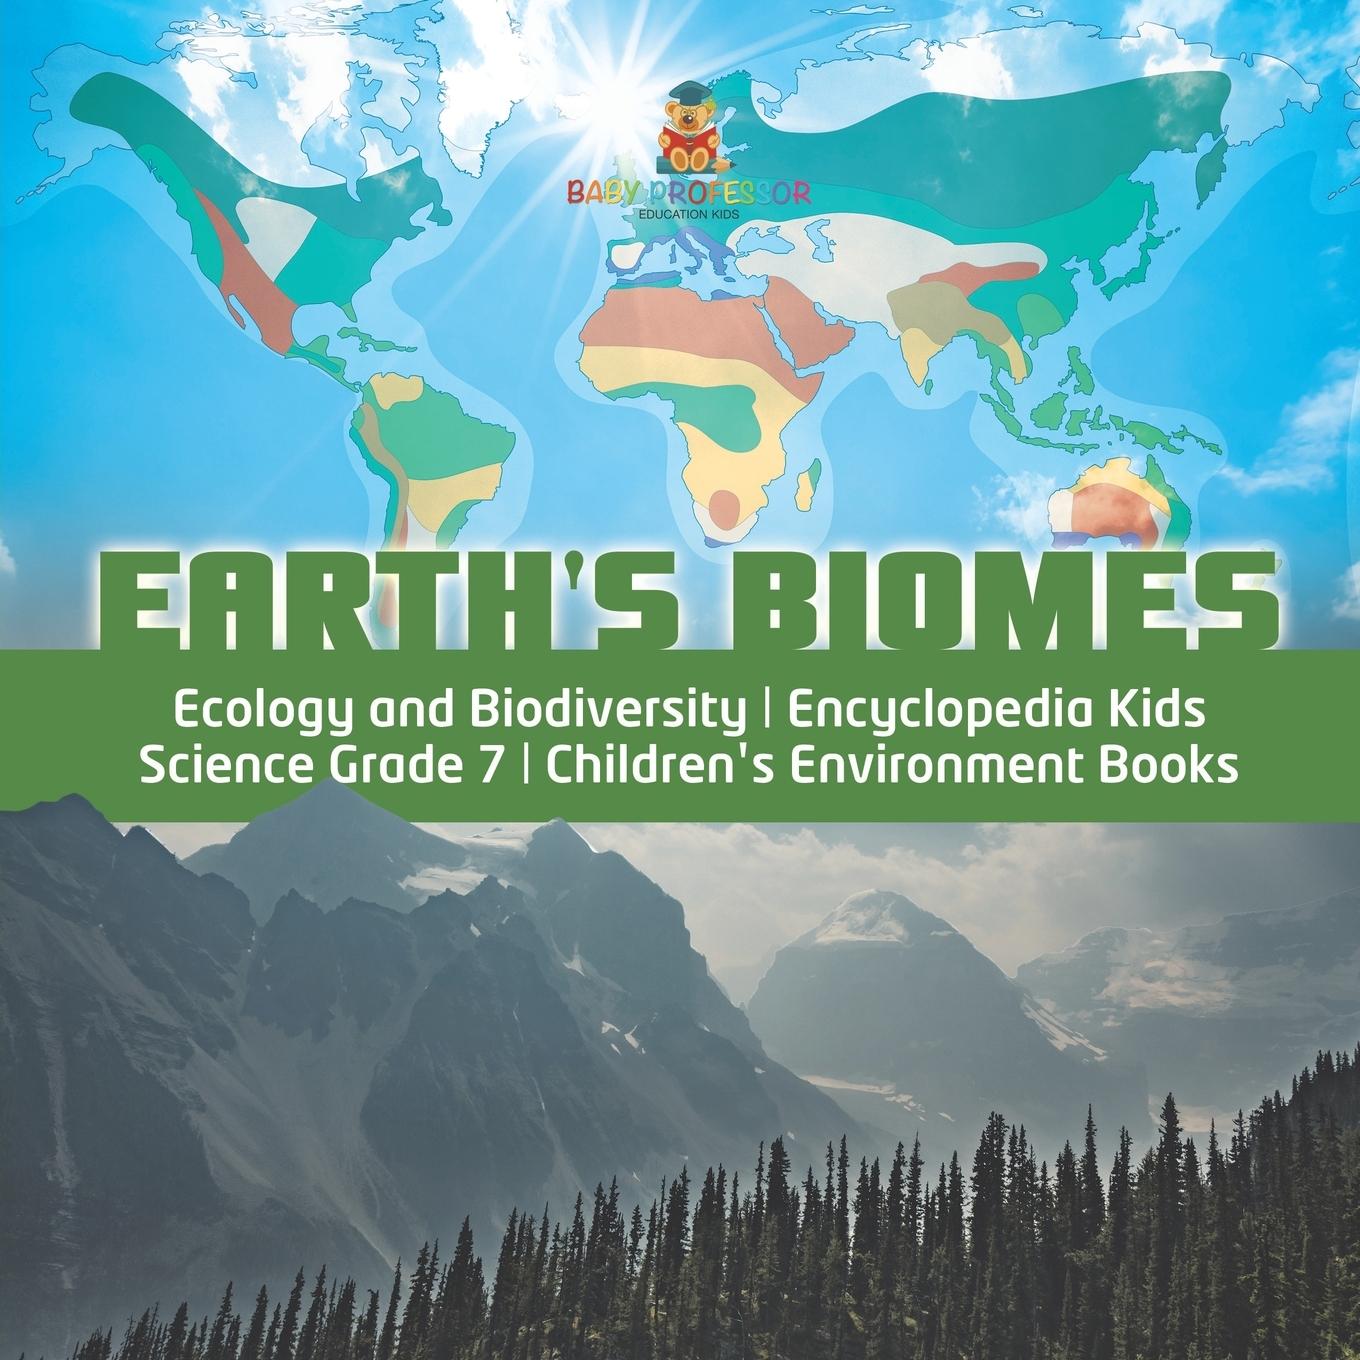 Kniha Earth's Biomes Ecology and Biodiversity Encyclopedia Kids Science Grade 7 Children's Environment Books Baby Professor